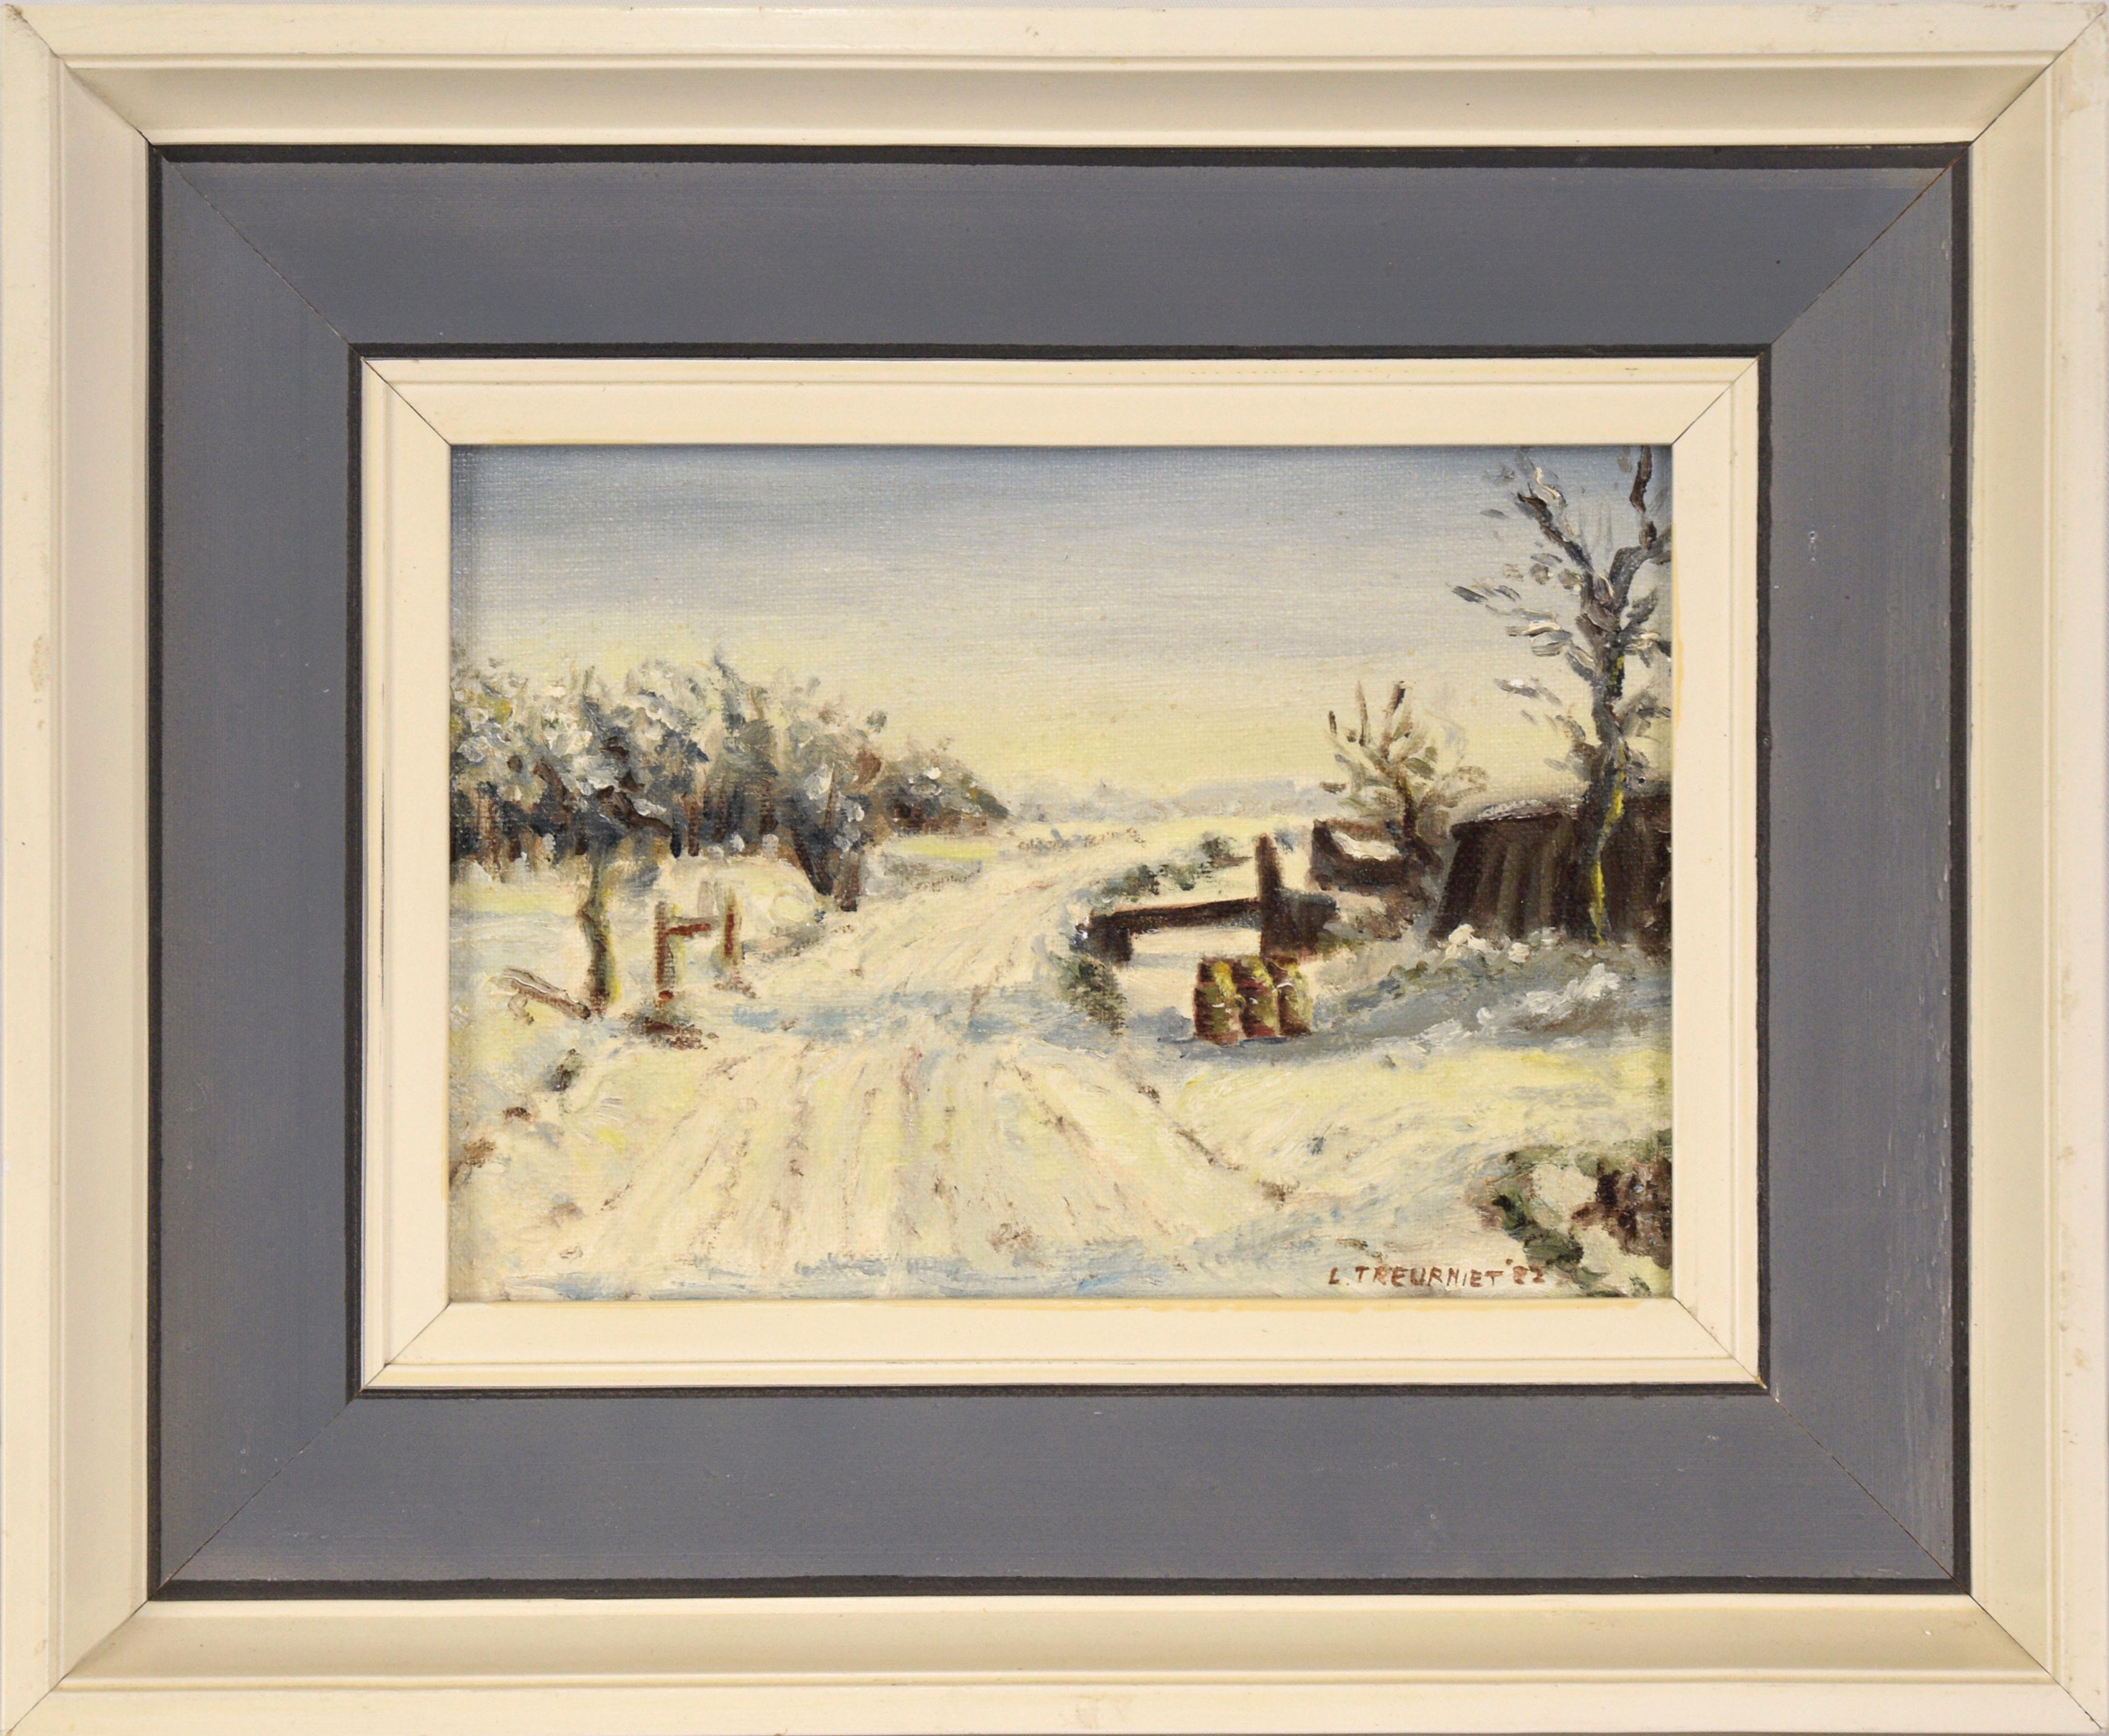 L. Treurniet Landscape Painting - French Country Road in Winter - Landscape